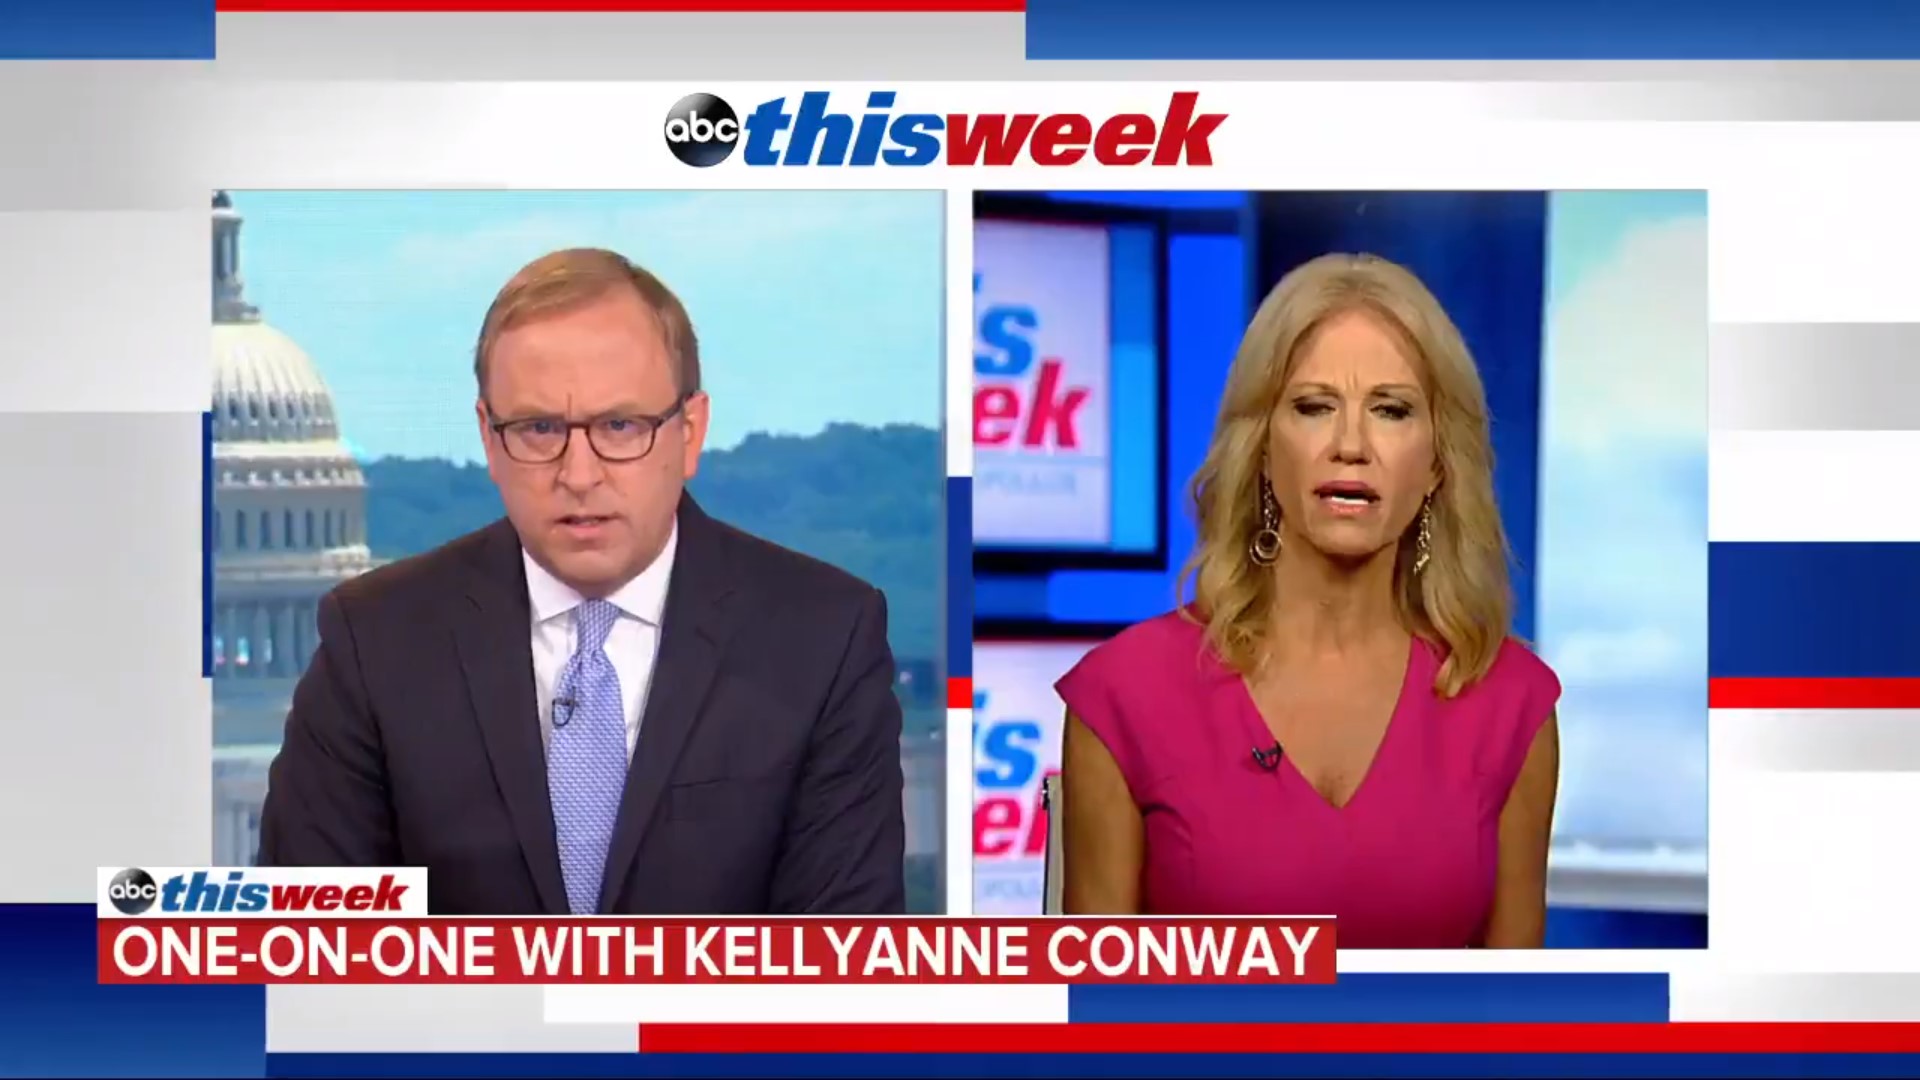 WATCH: Kellyanne Conway Can’t Name Highest-Ranking Black Official In White House